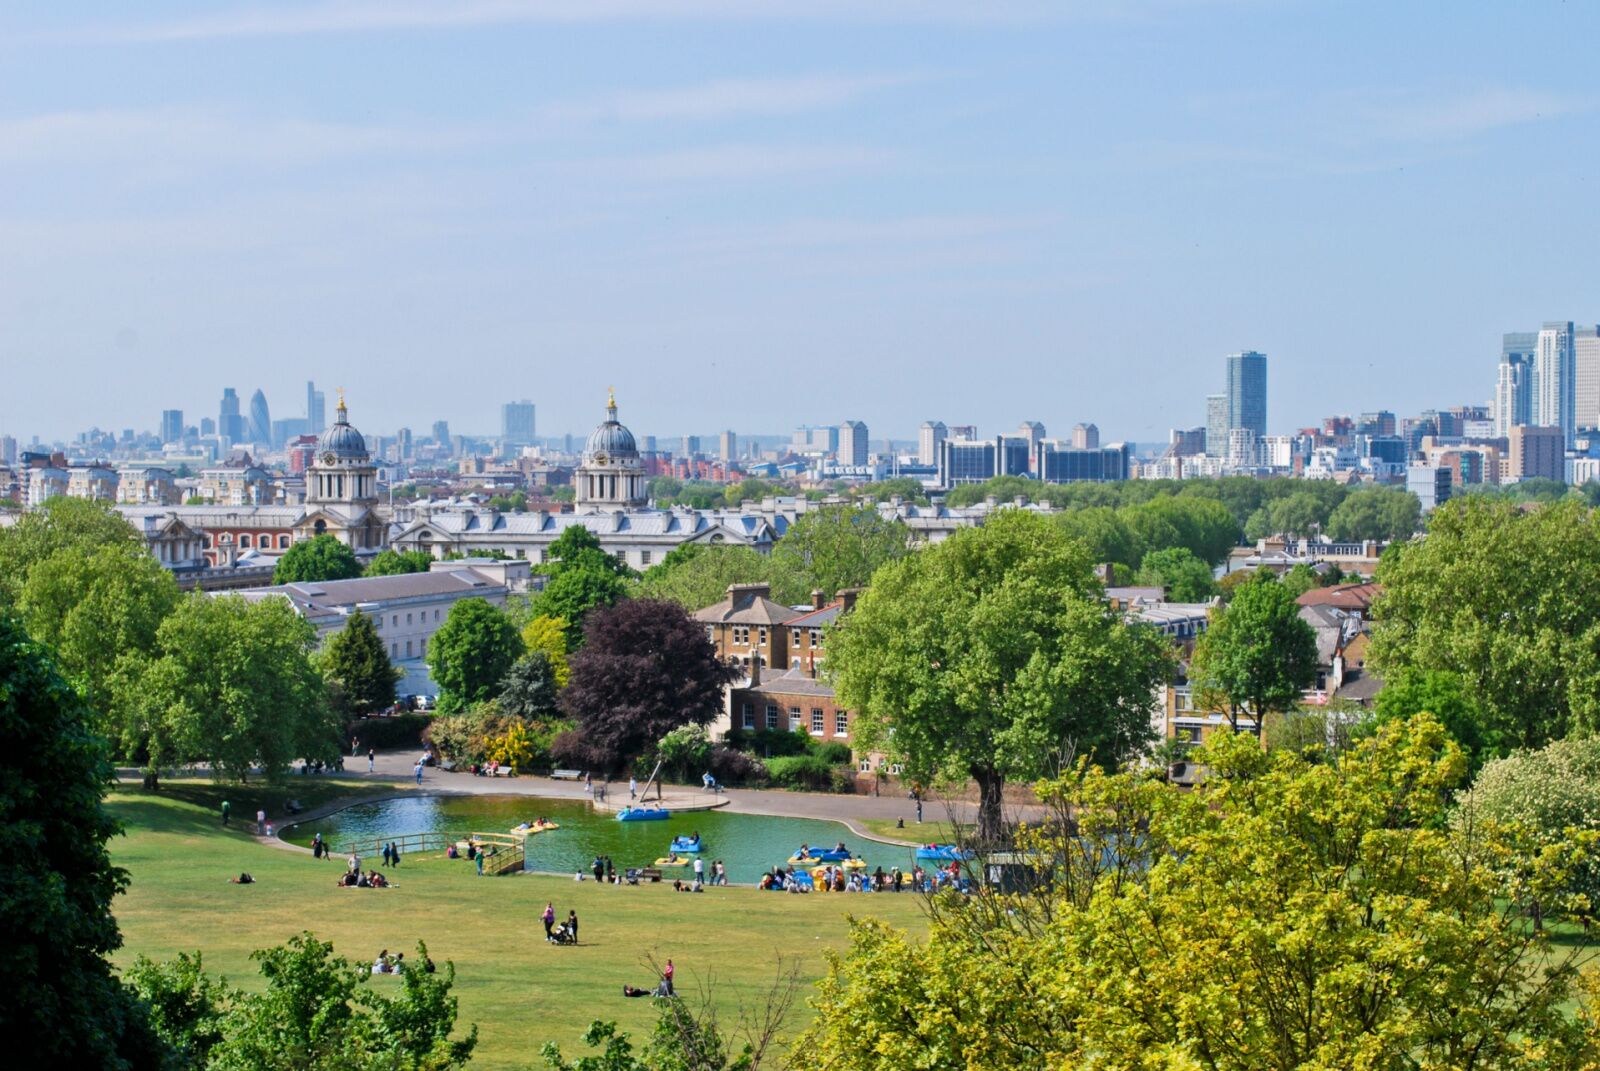 Parks in london - greenwich park observatory